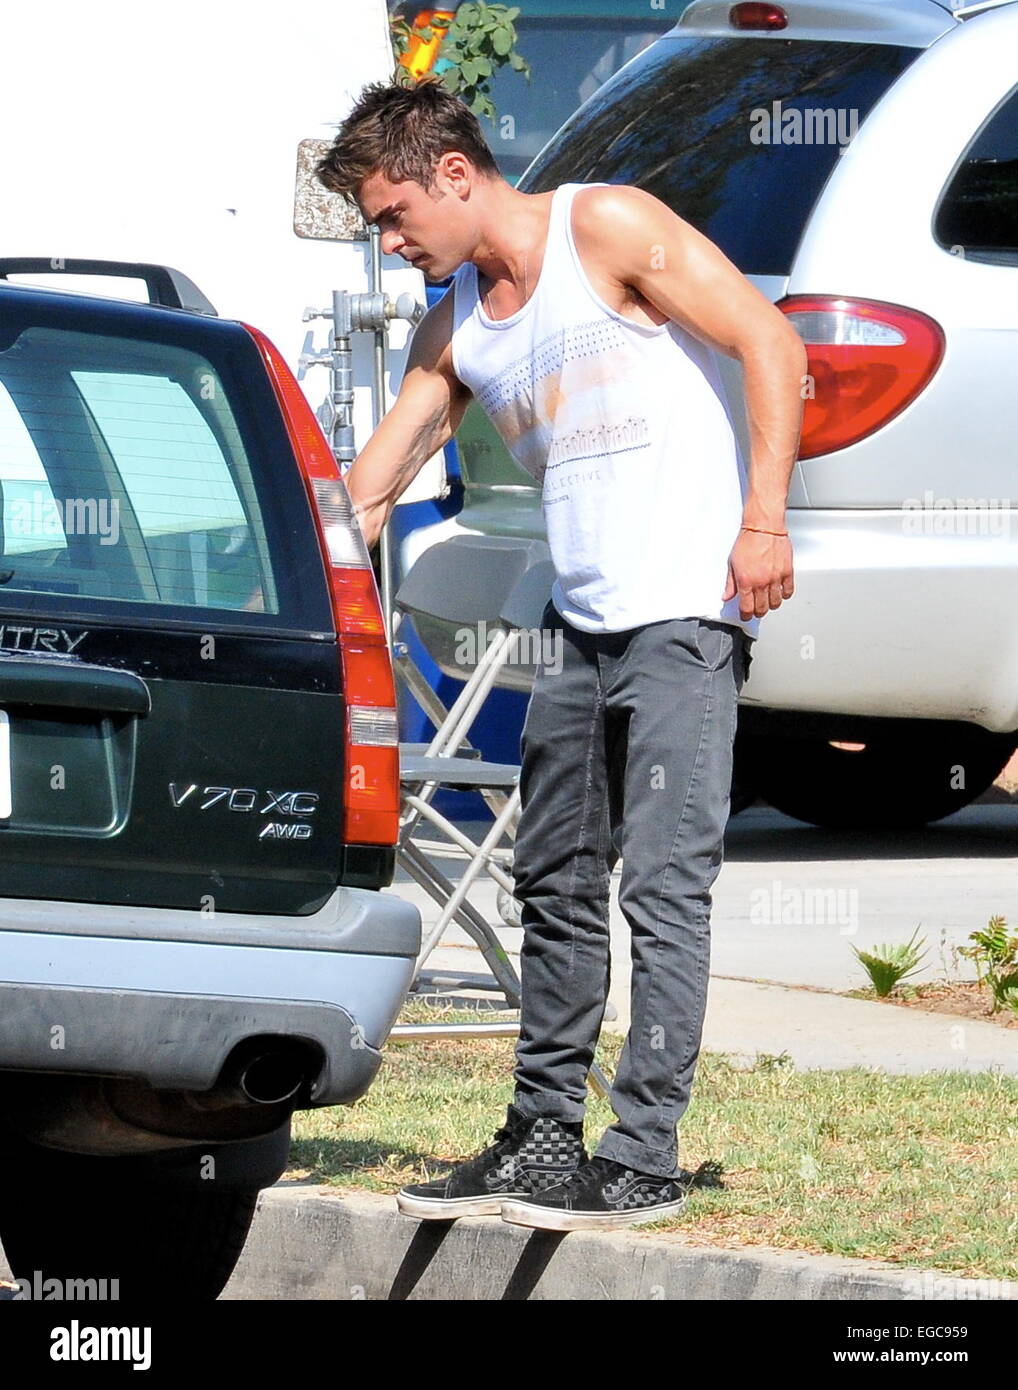 Zac Efron shows off his biceps as he continues filming for his new movie 'We Are Your Friends' in Northridge, California Featuring: Zac Efron Where: Northridge, California, United States When: 20 Aug 2014 Stock Photo